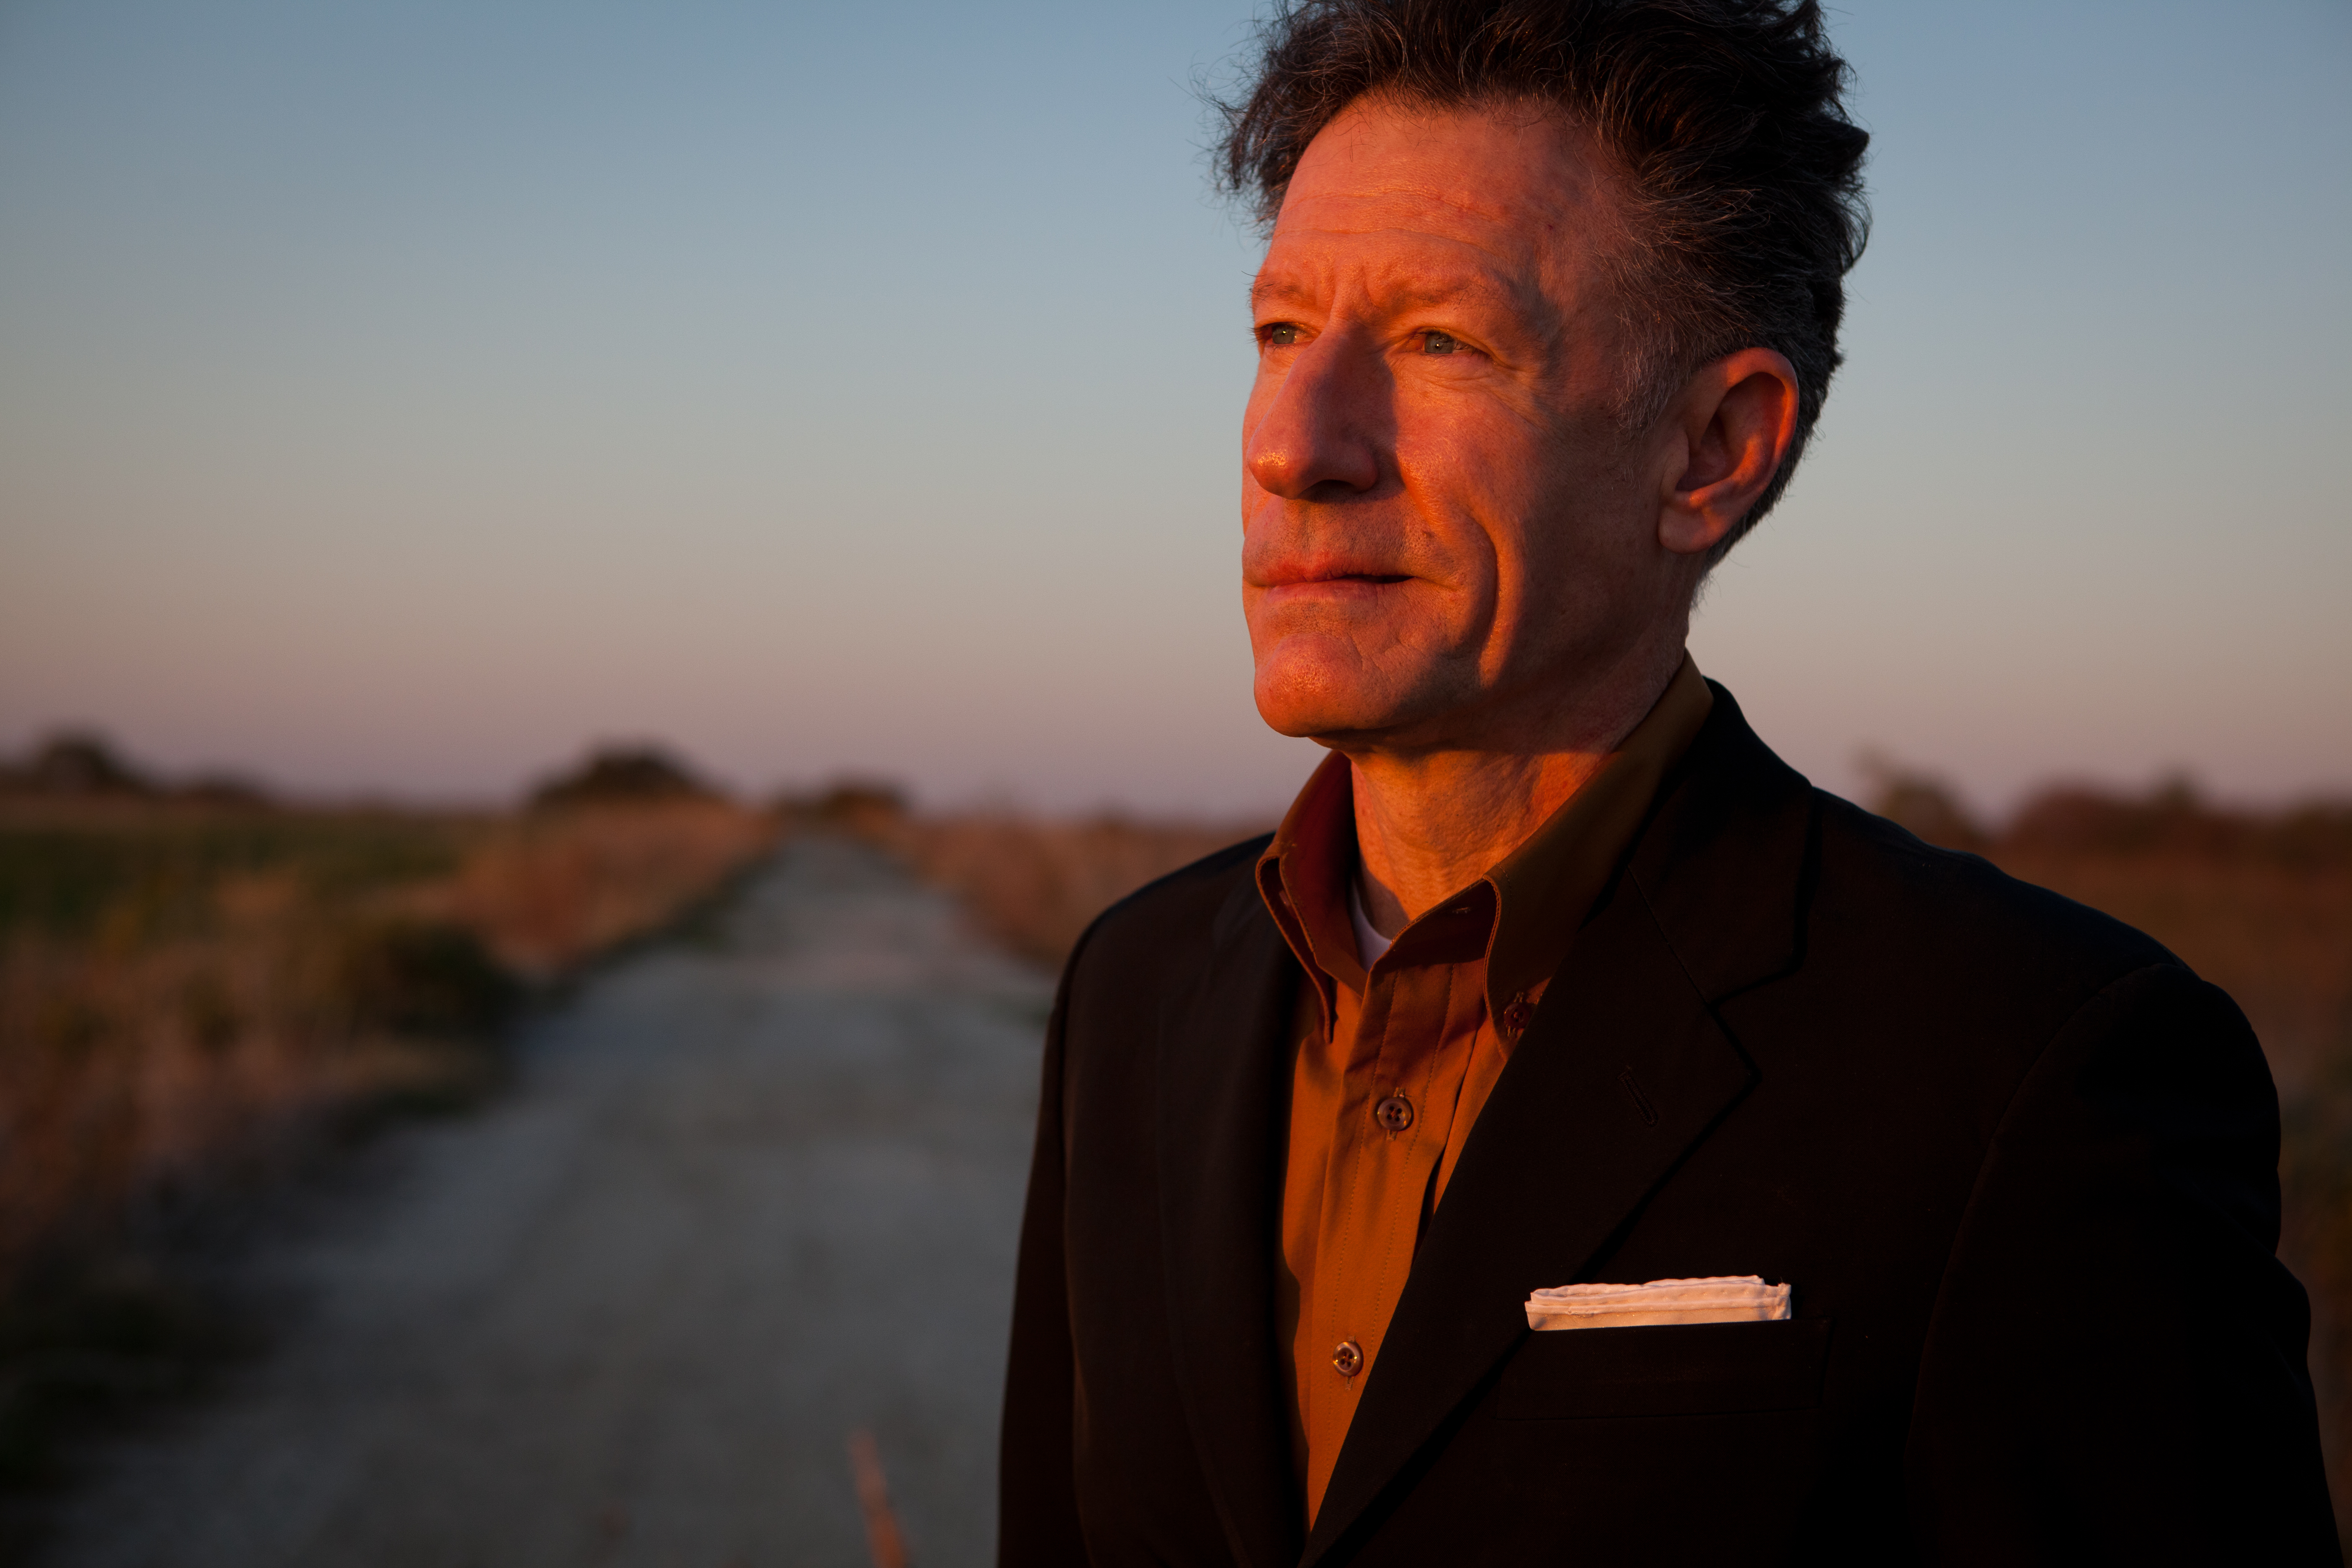 HD Quality Wallpaper | Collection: Music, 5616x3744 Lyle Lovett